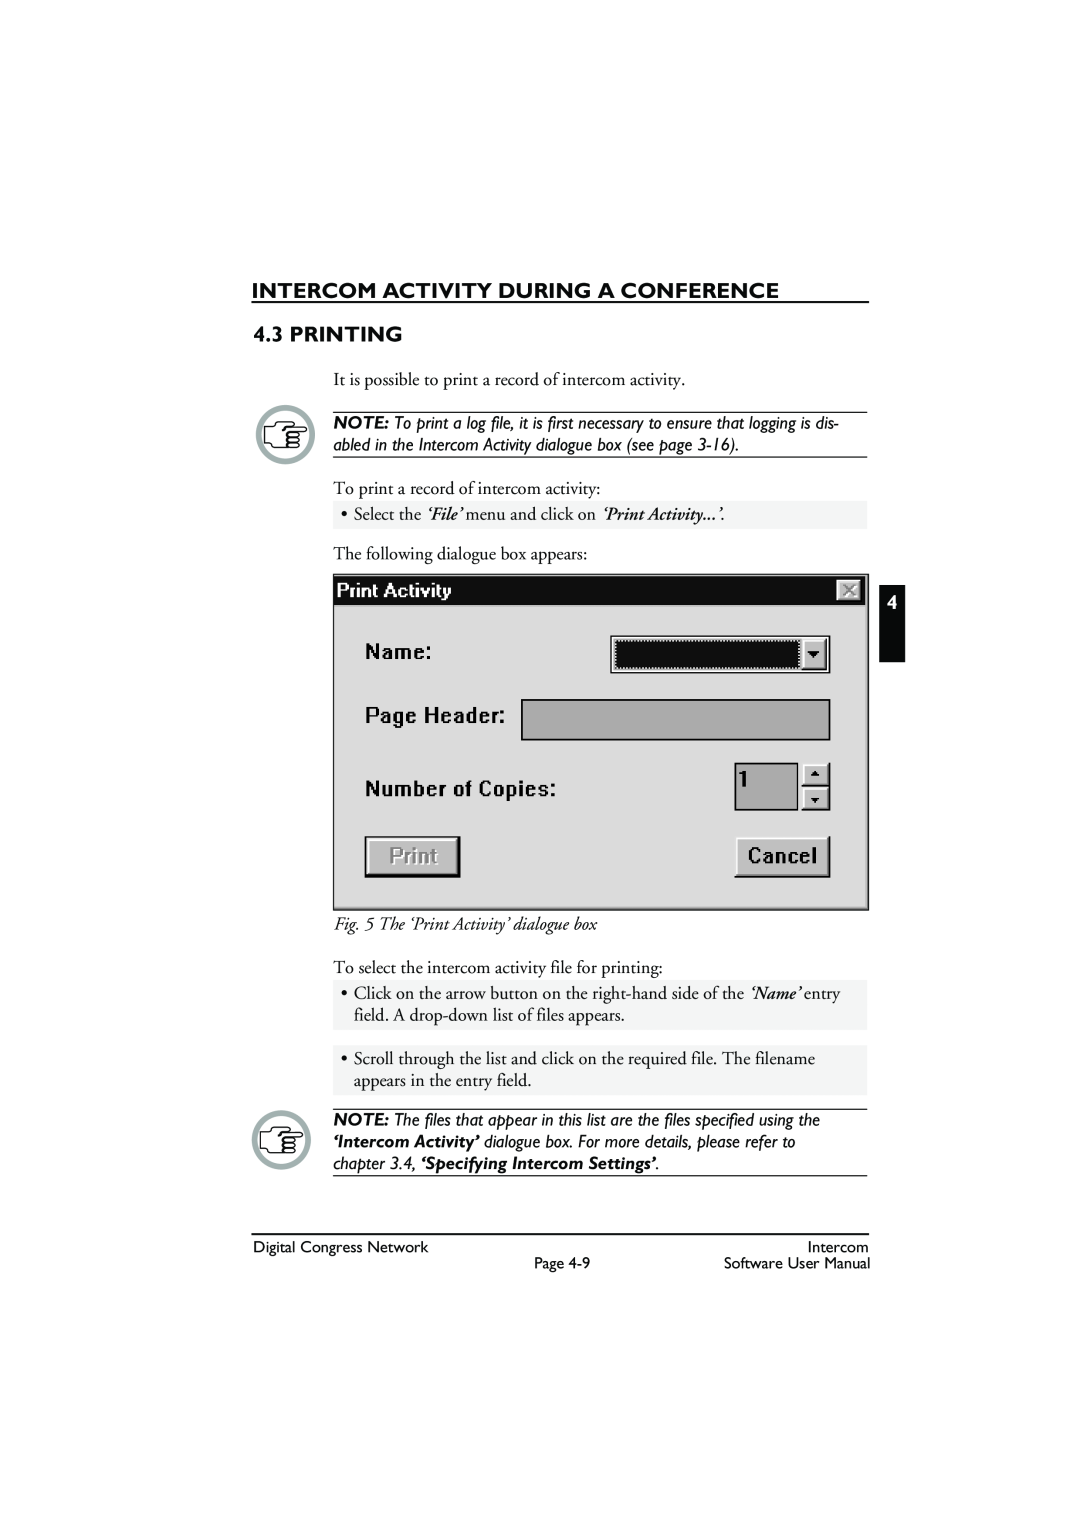 Bosch Appliances LBB 3573 user manual Printing, The ‘Print Activity’ dialogue box, Intercom Activity During A Conference 